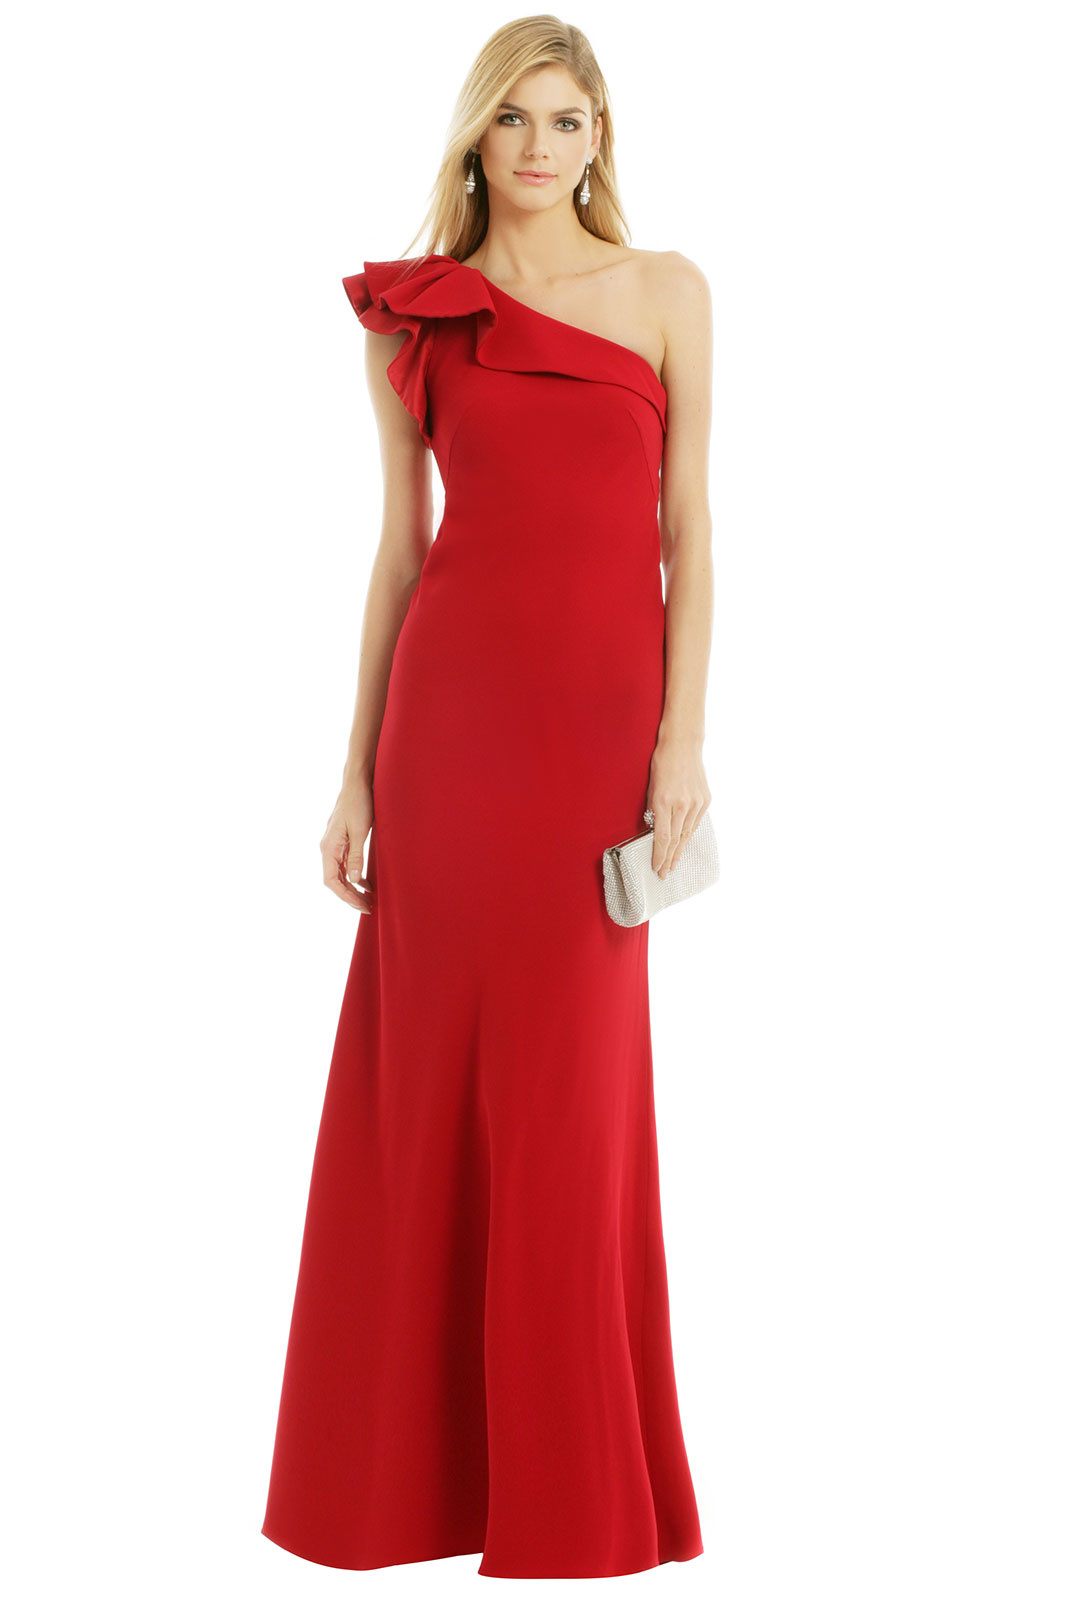 Rent the Runway - Carmen Marc Valvo All Eyes On You Gown